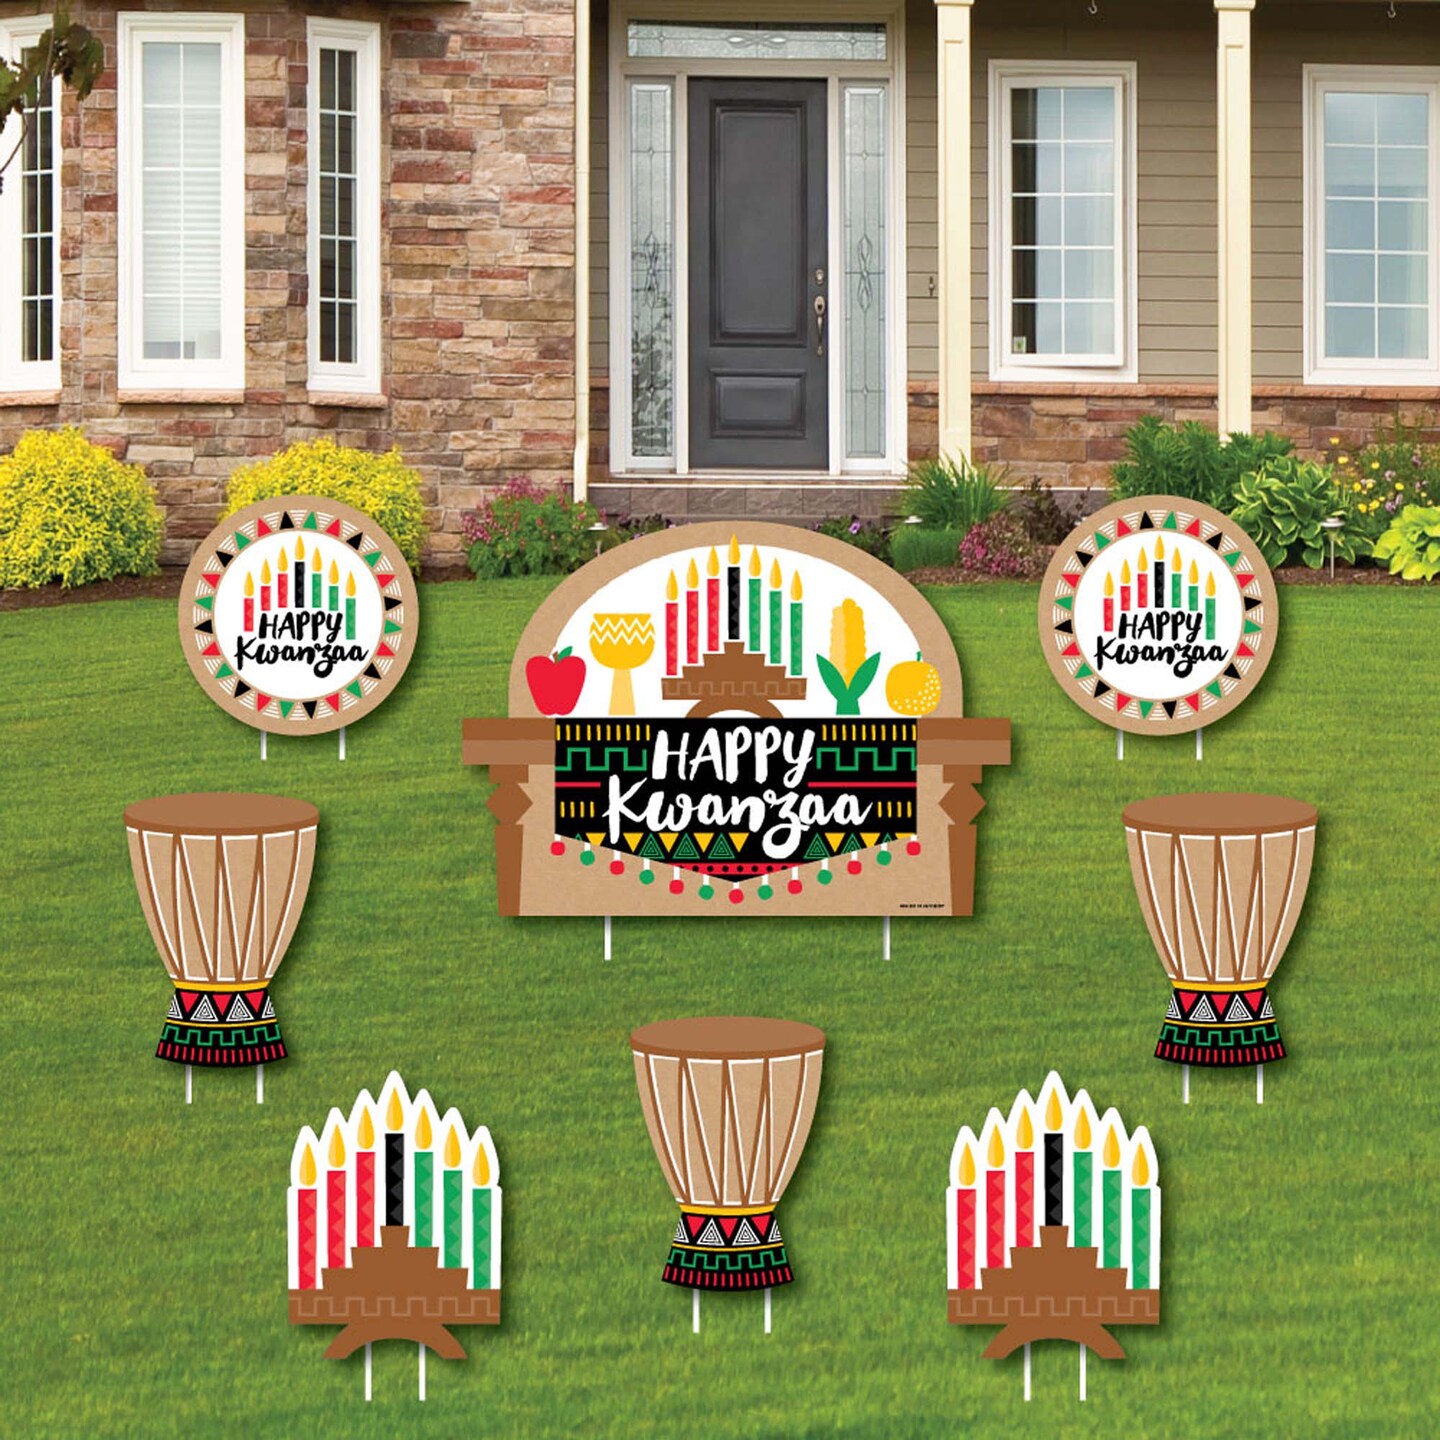 Big Dot of Happiness Happy Kwanzaa - Yard Sign and Outdoor Lawn Decorations - Party Holiday Yard Signs - Set of 8